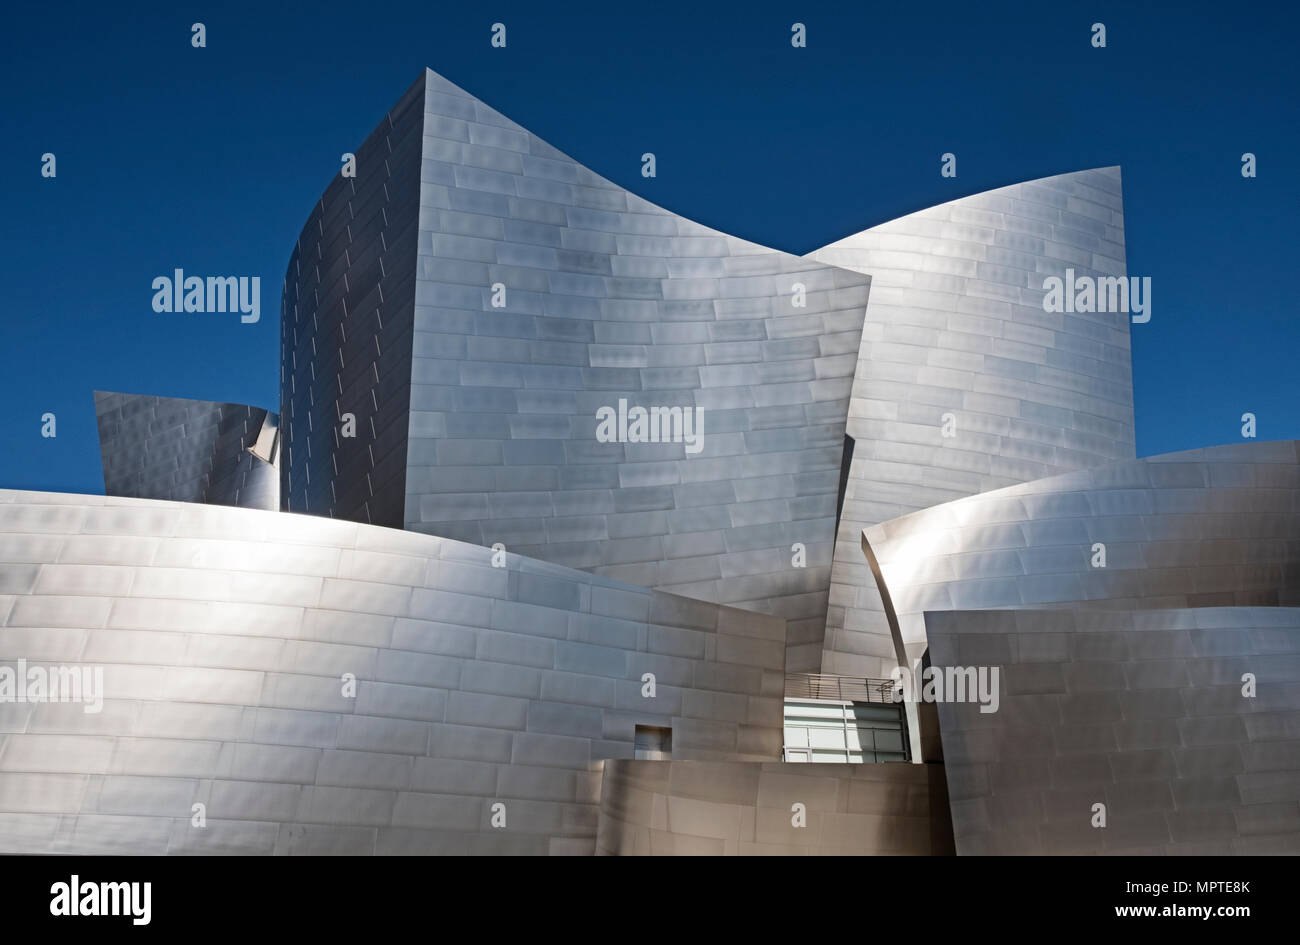 LOS ANGELES, USA - MARCH 5, 2018: A view of the landmark Walt Disney Philharmonic Concert Hall in Los Angeles, designed by Frank Gehry. Stock Photo